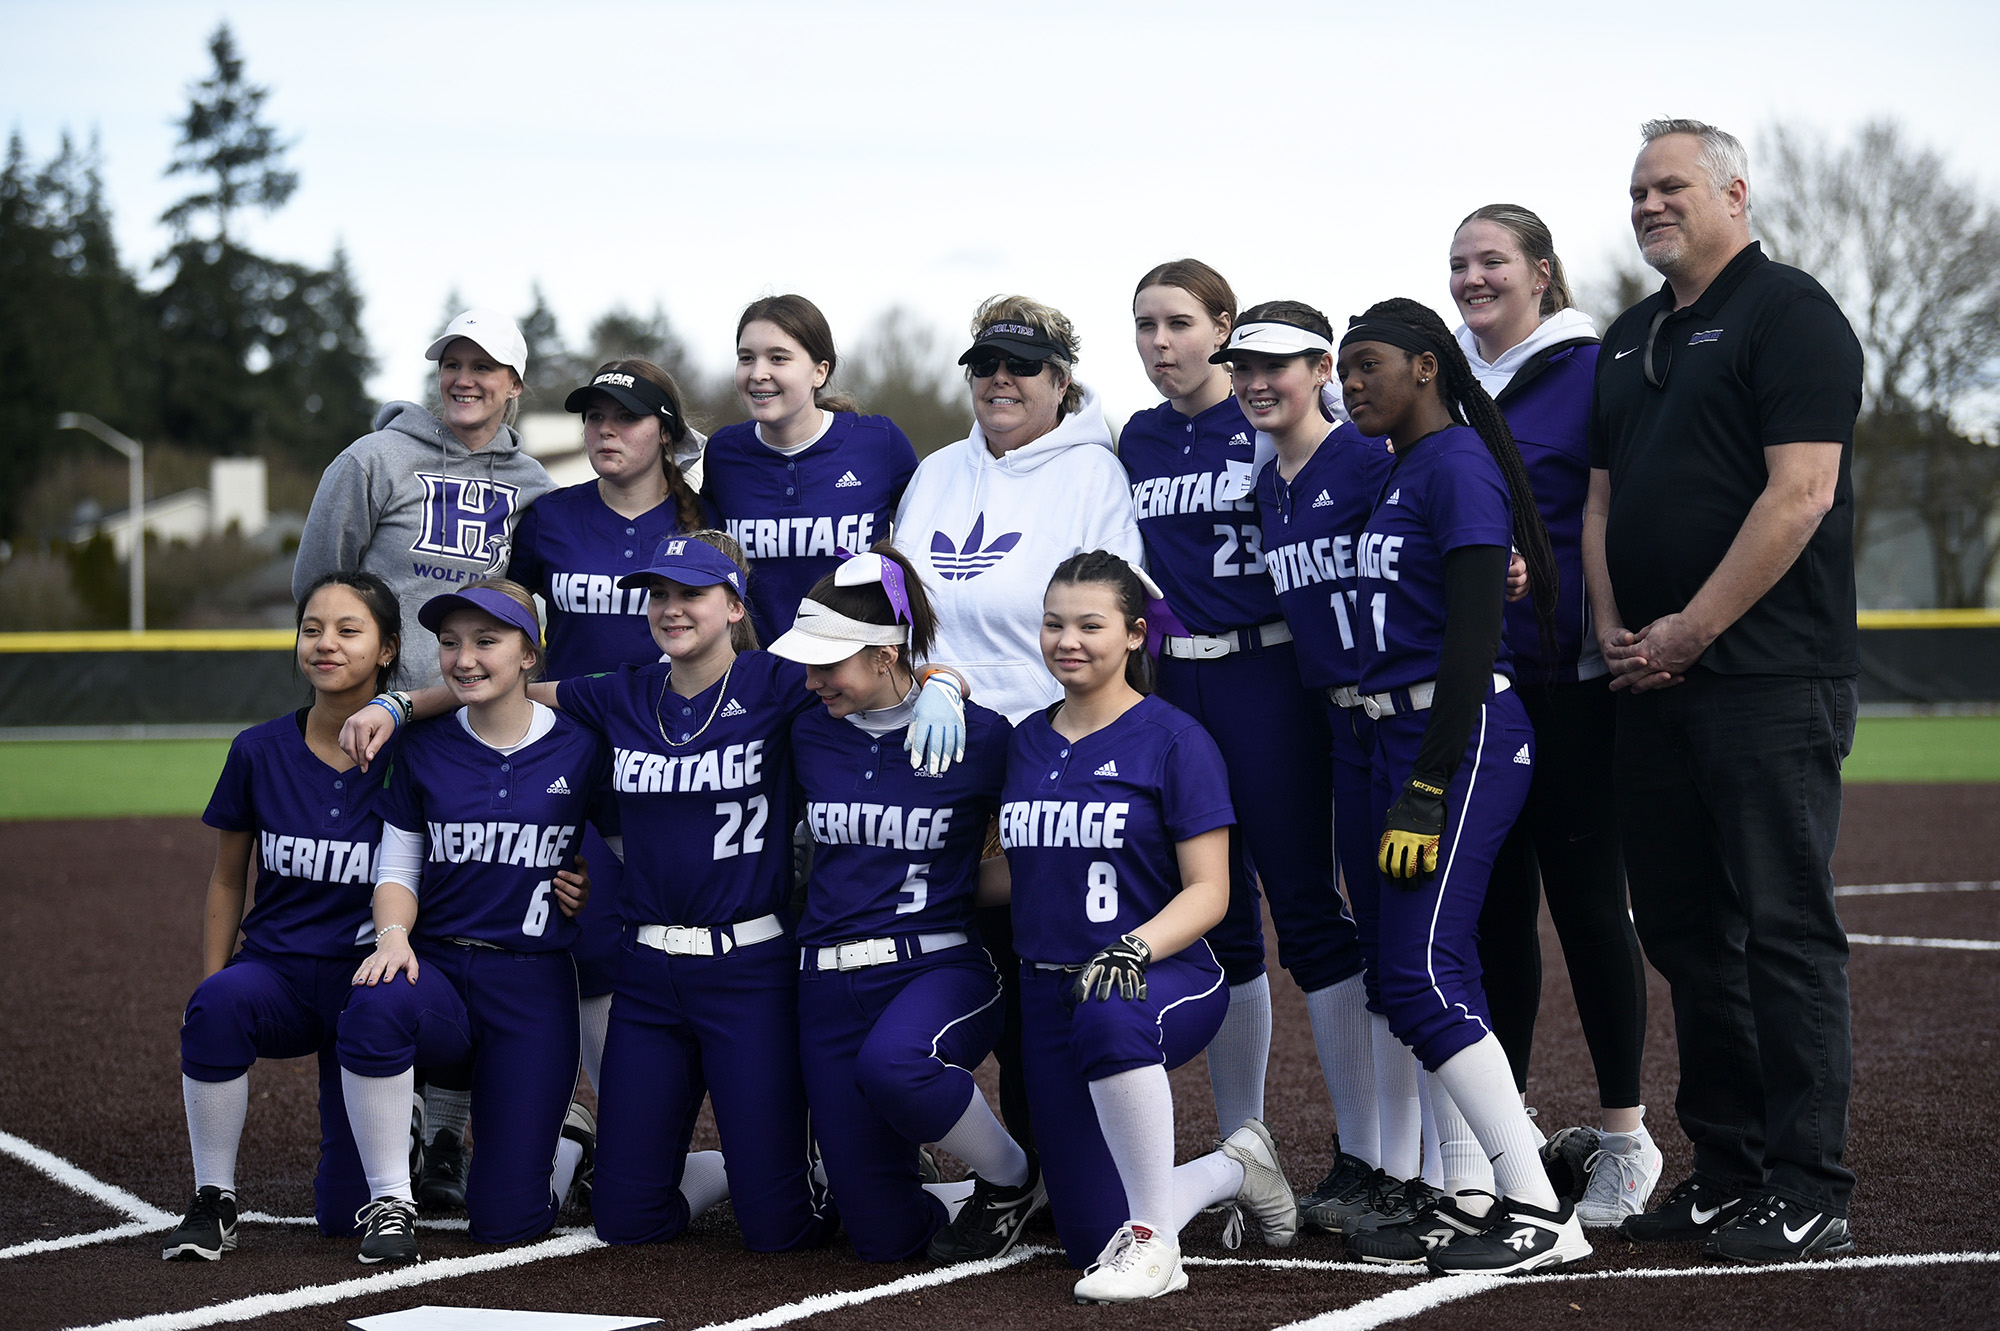 The Heritage softball team poses for a photo with former athletic director Leta Meyer (center in white) and principal Derek Garrison, right, prior to the Timberwolves' 8-1 win over Kelso in a softball game at Heritage on Tuesday, March 14, 2023.